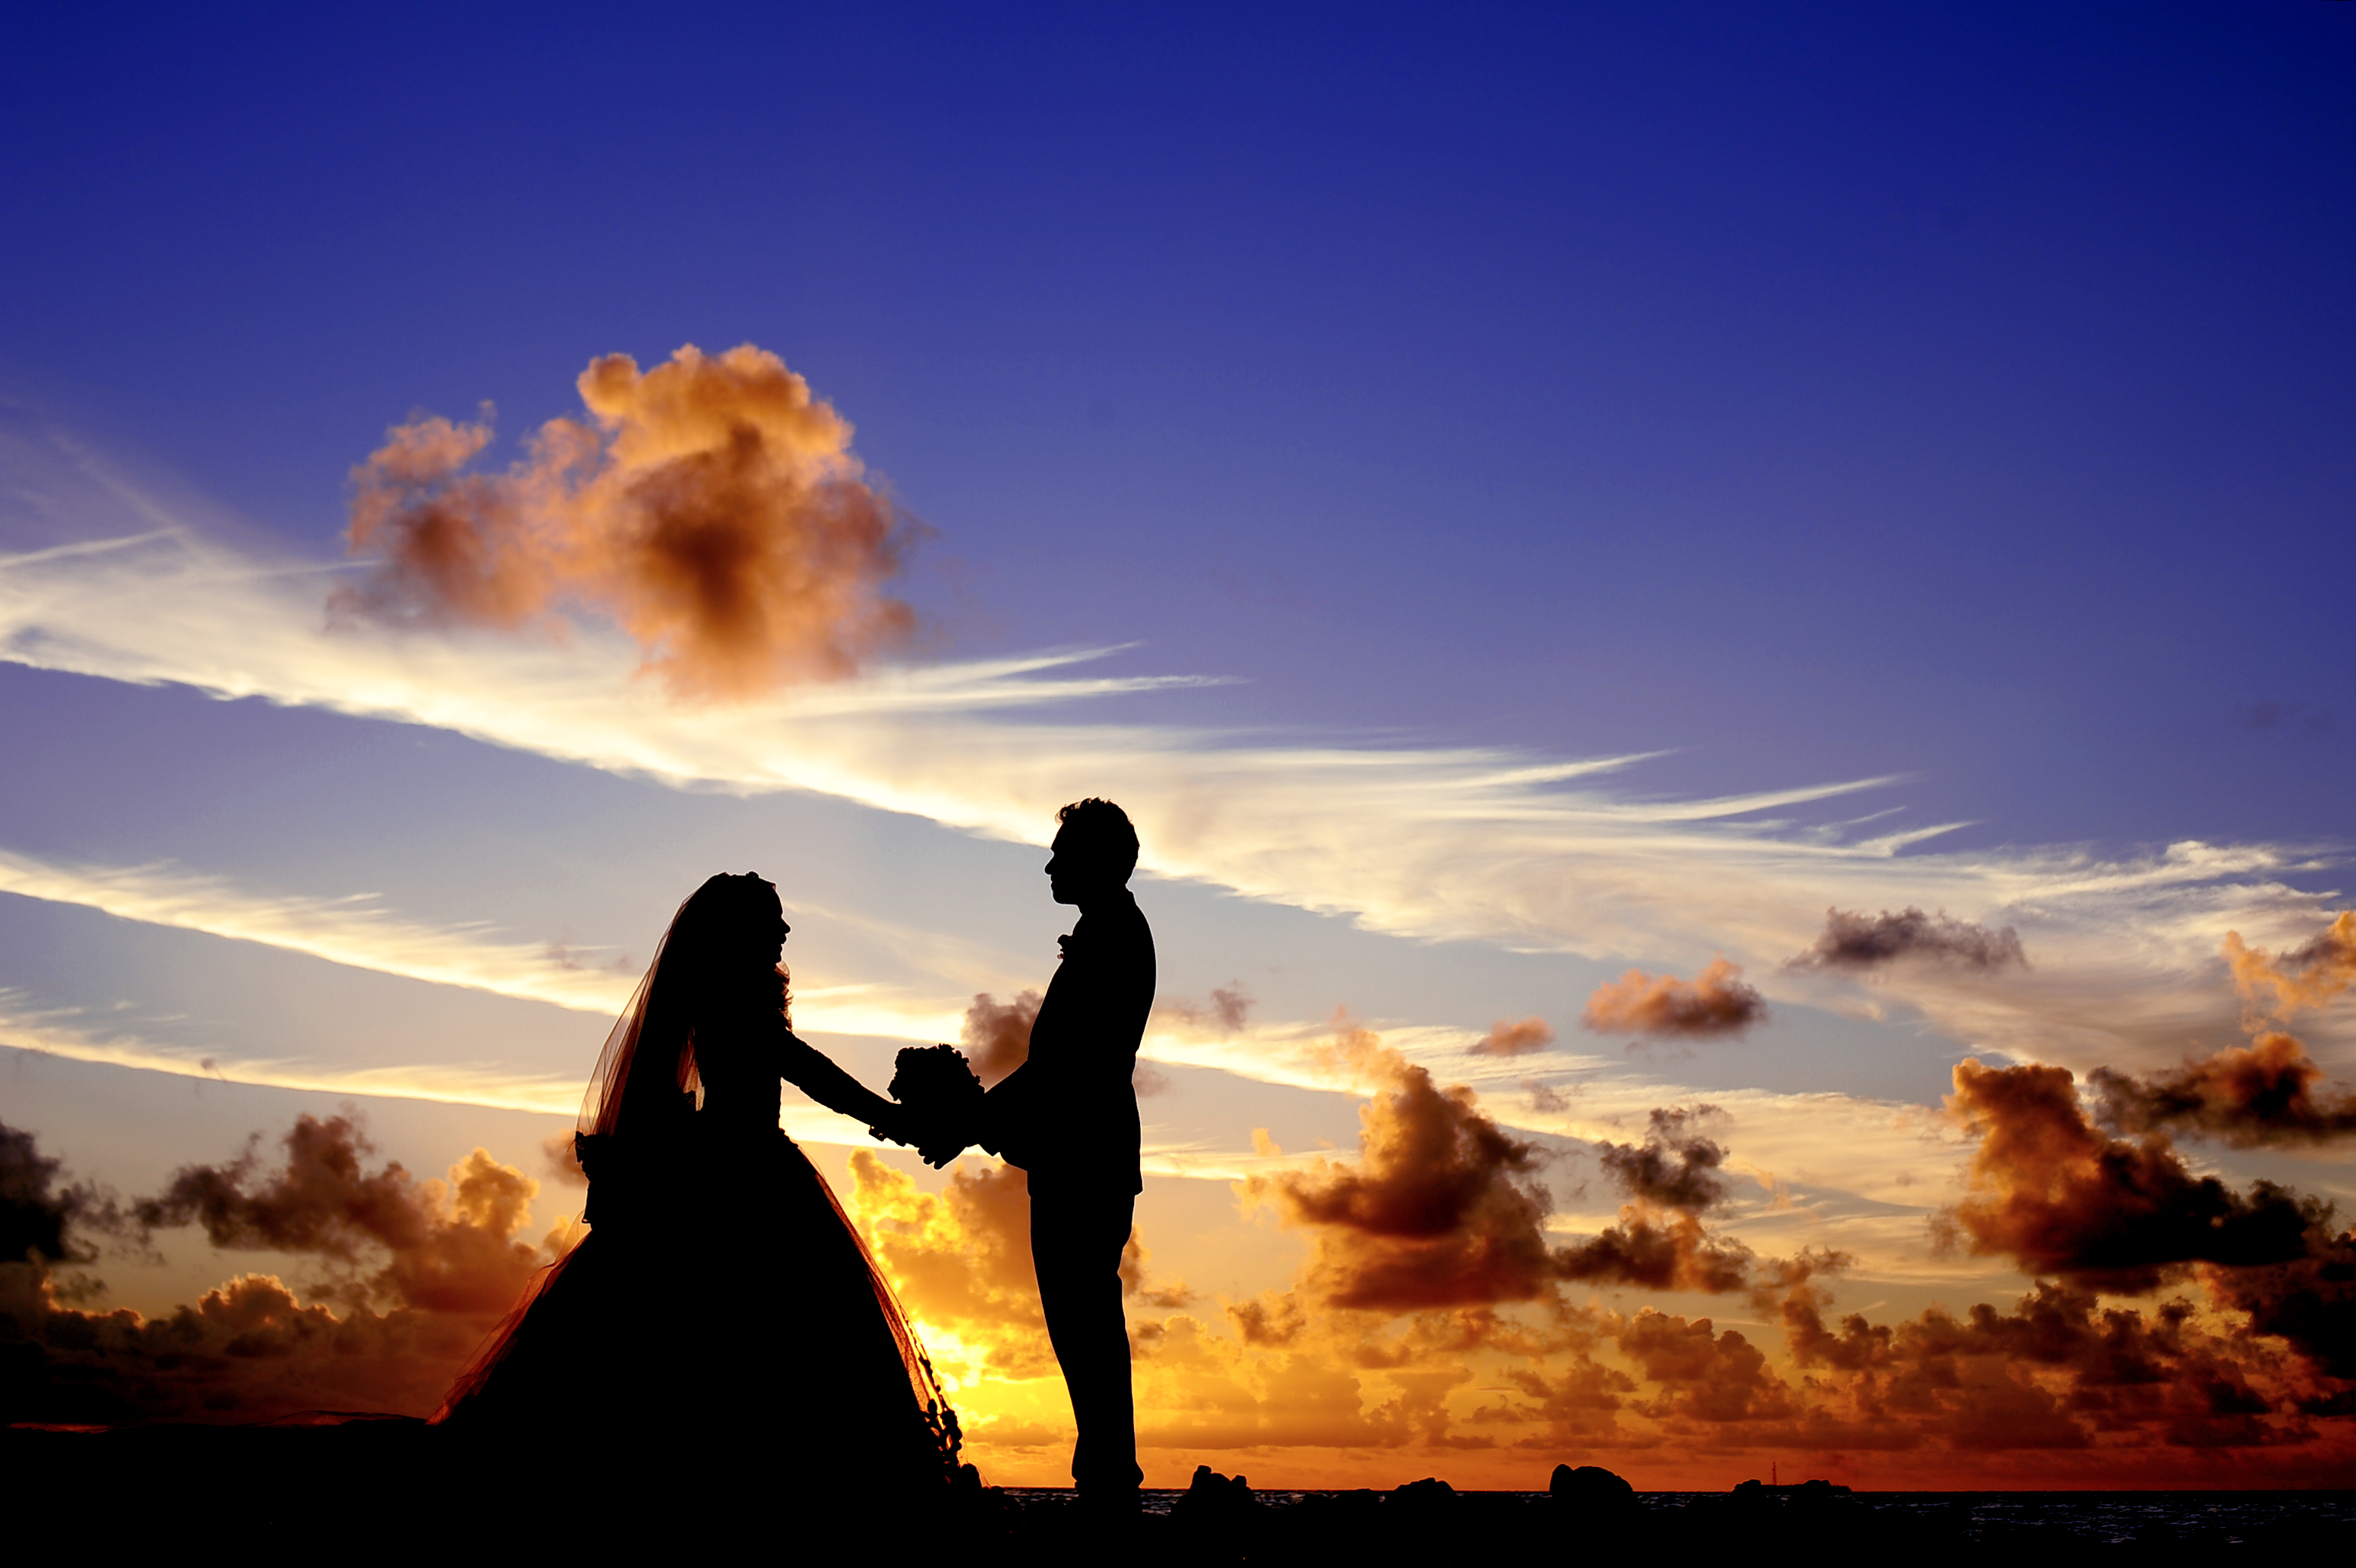 pair, holidays, sunset, clouds, love, couple, silhouettes, newlyweds